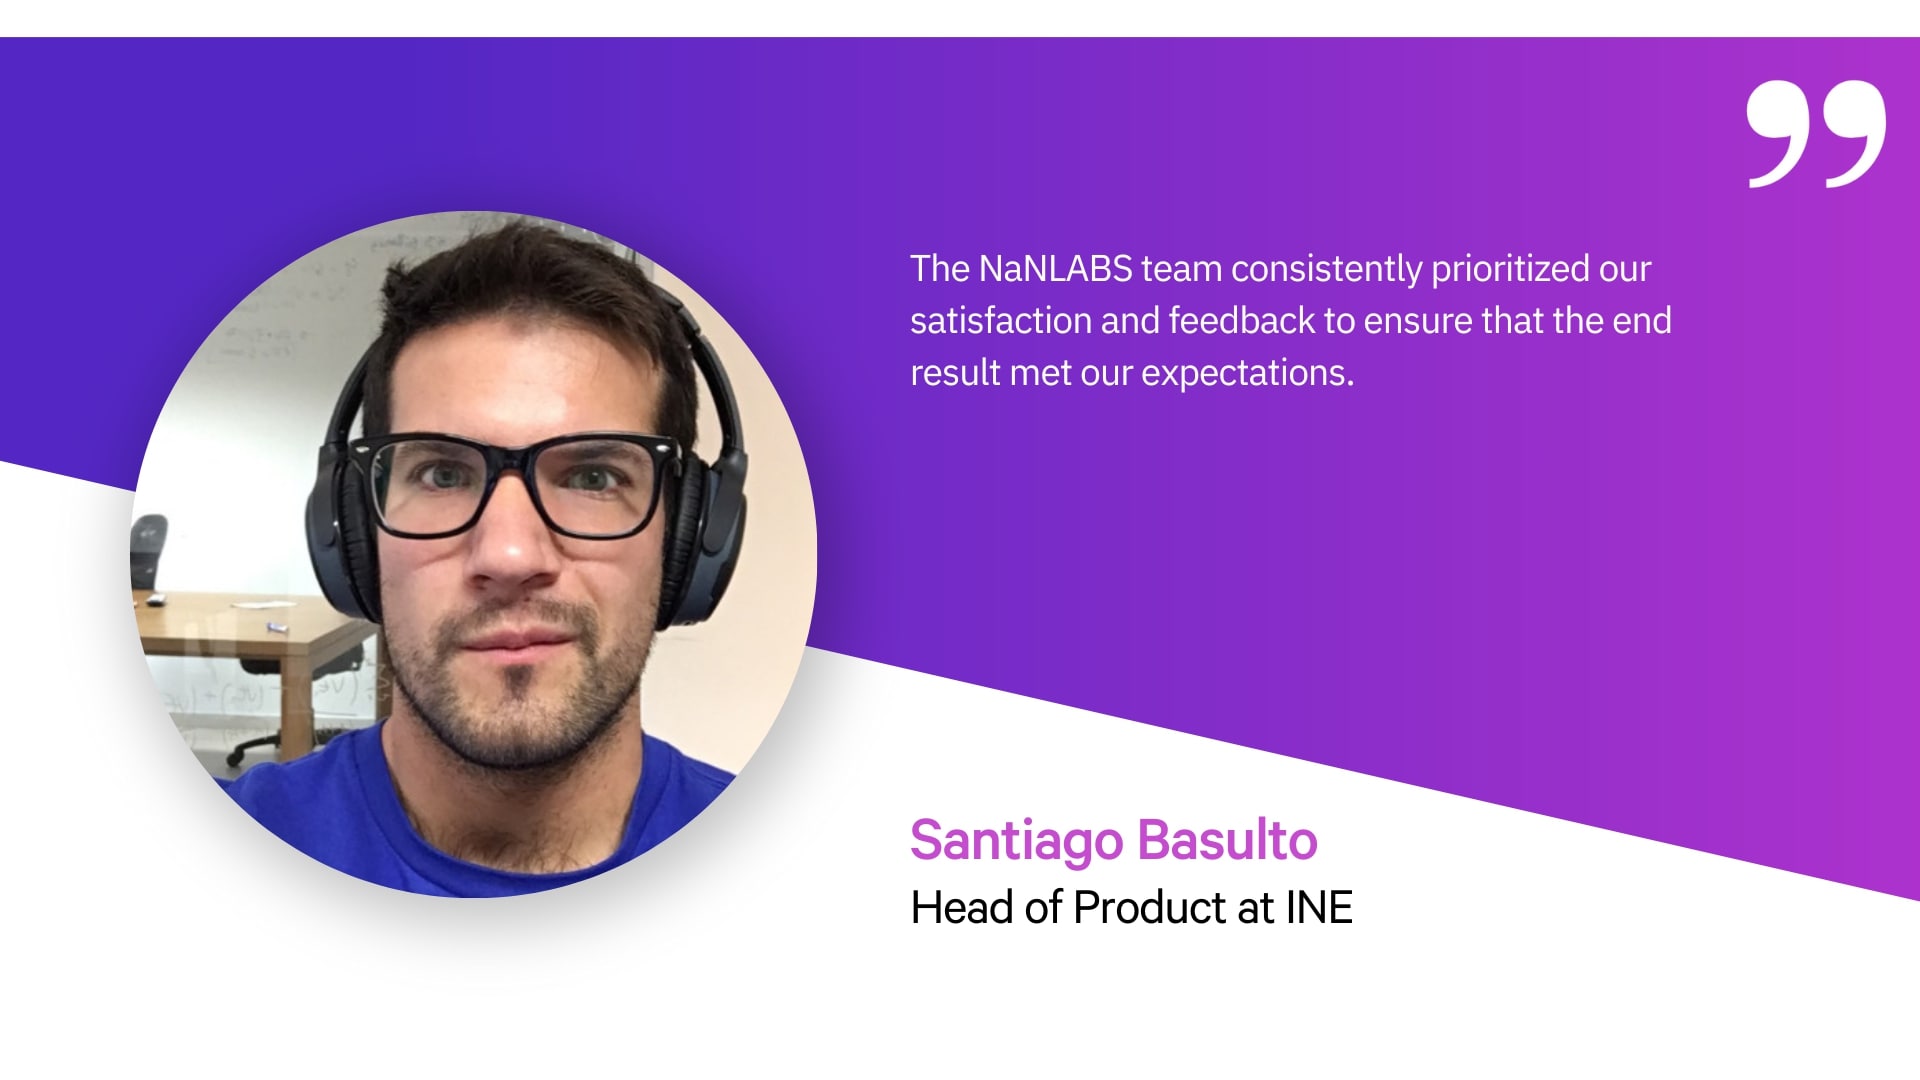 A quote by Santiago Basulto, Head of Product at INE about working with NaNLABS